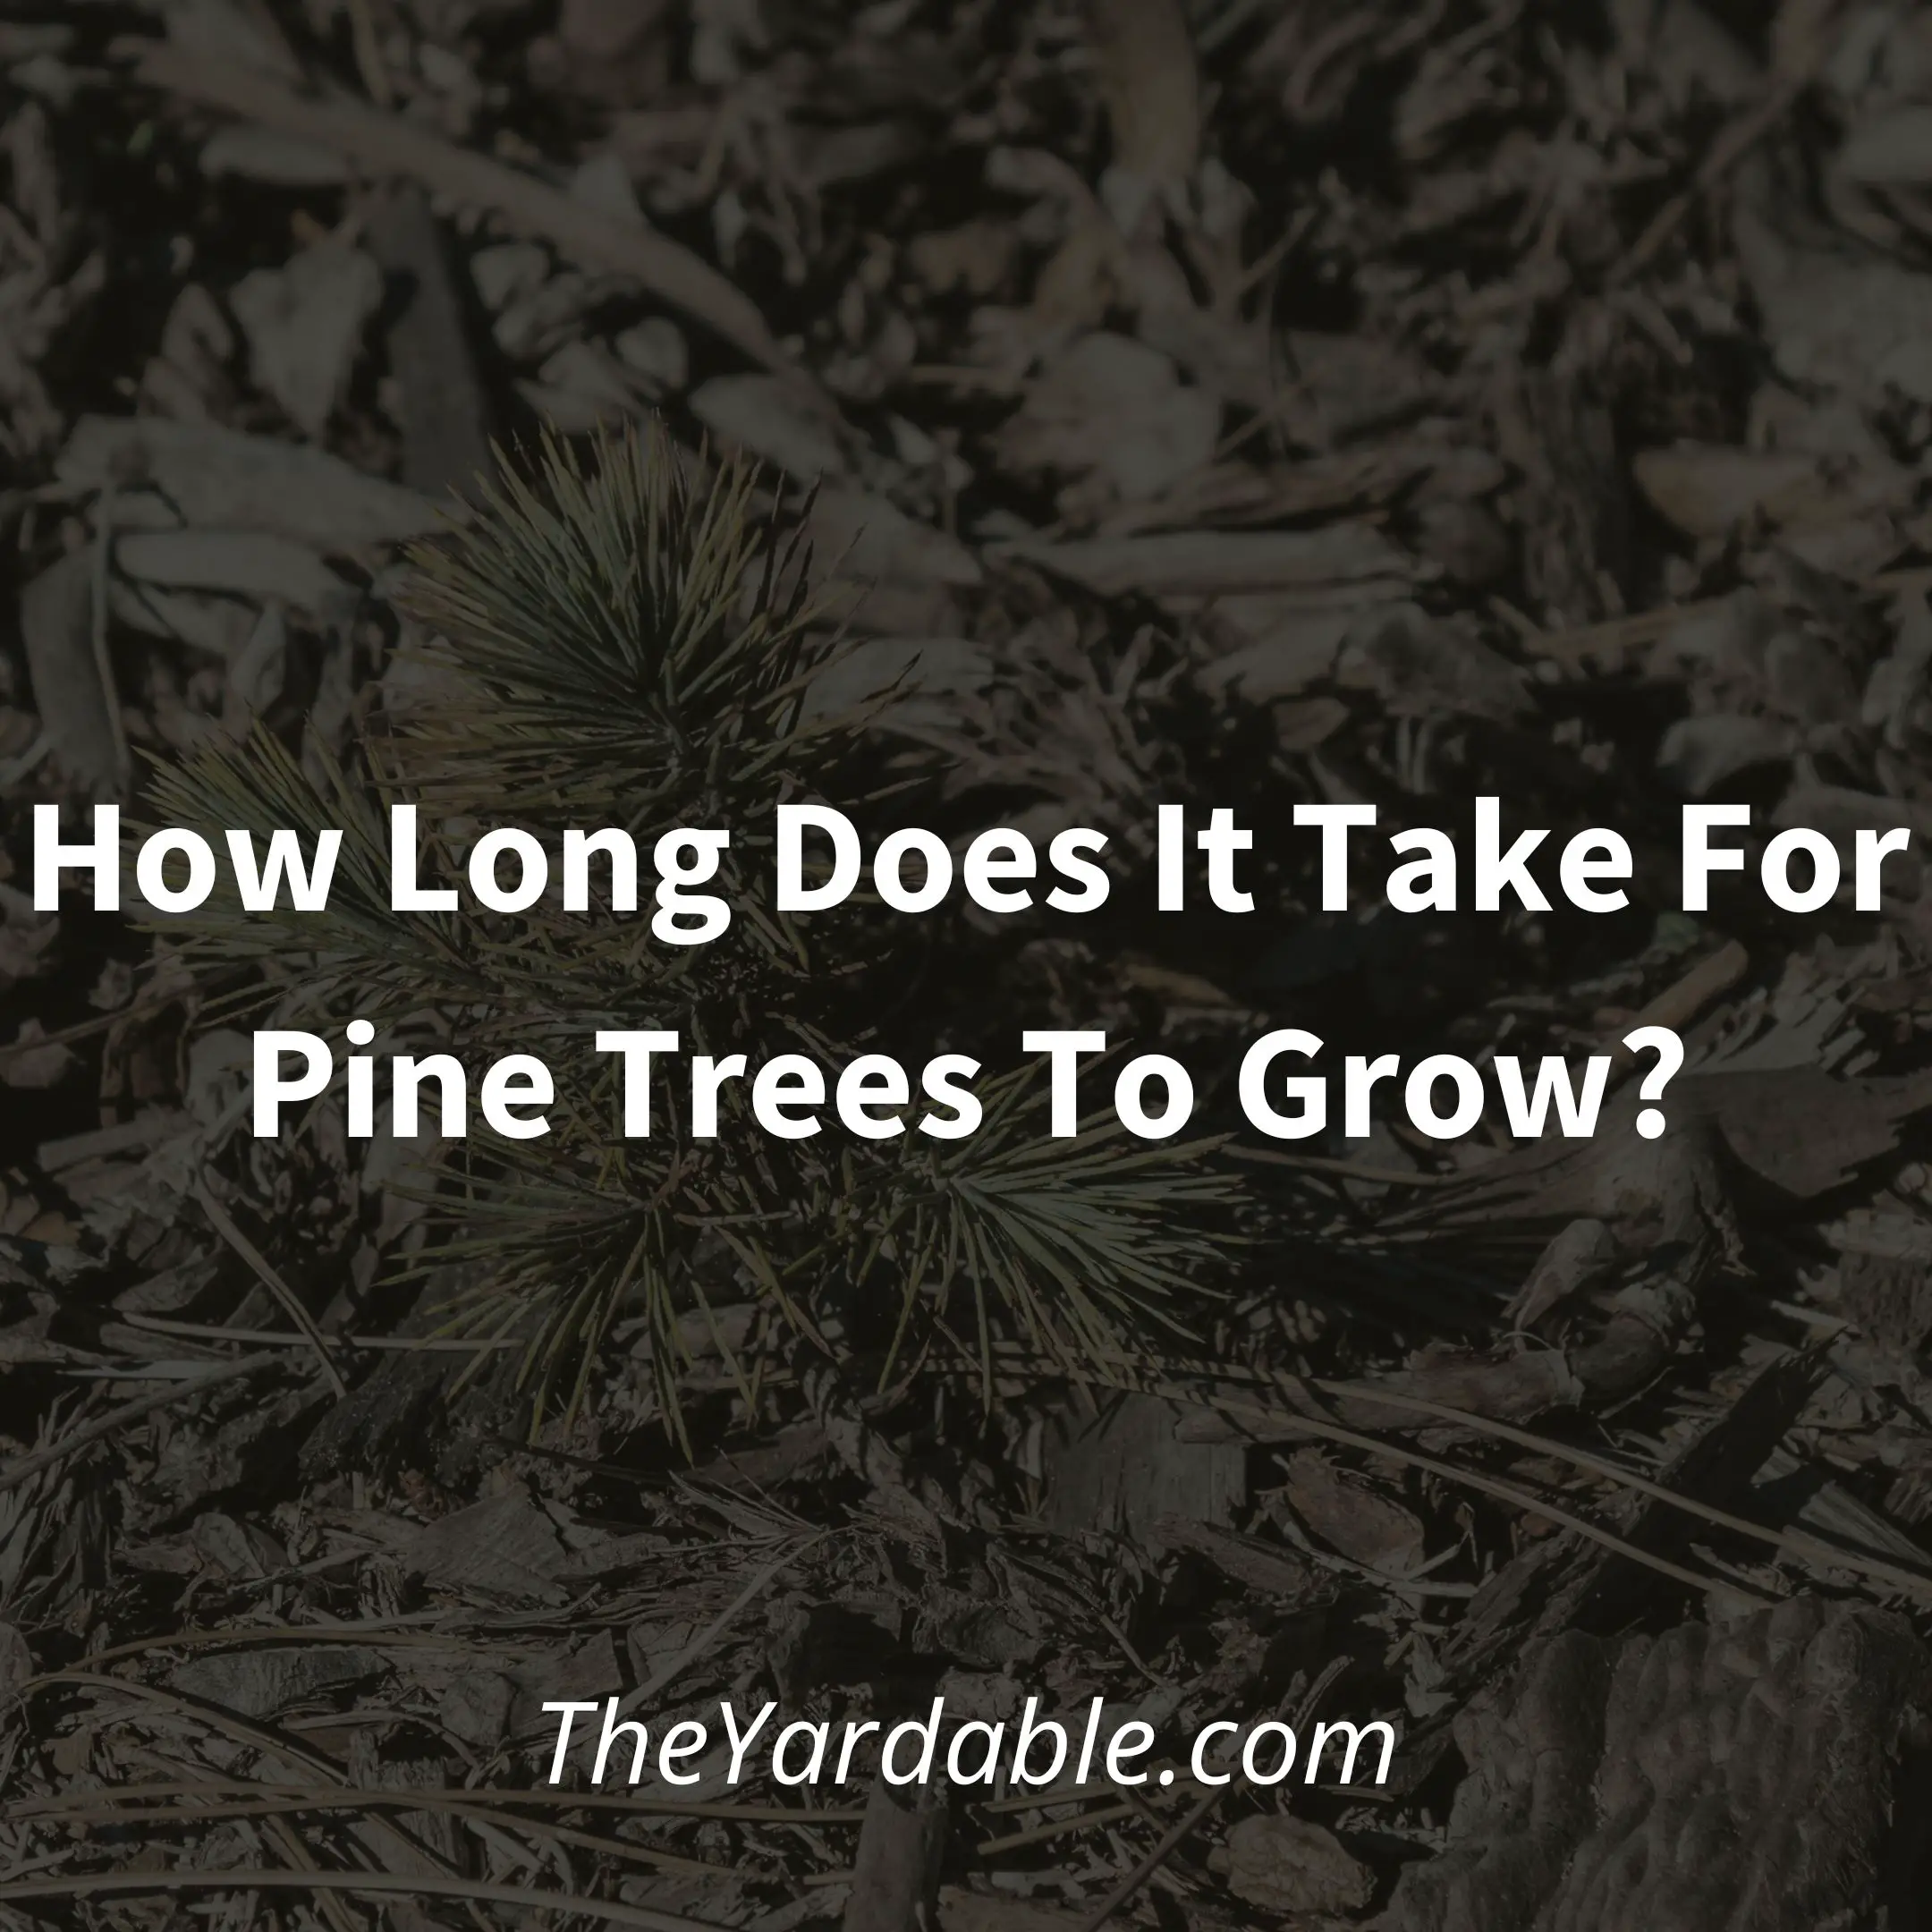 How Long Does It Take For Pine Trees To Grow